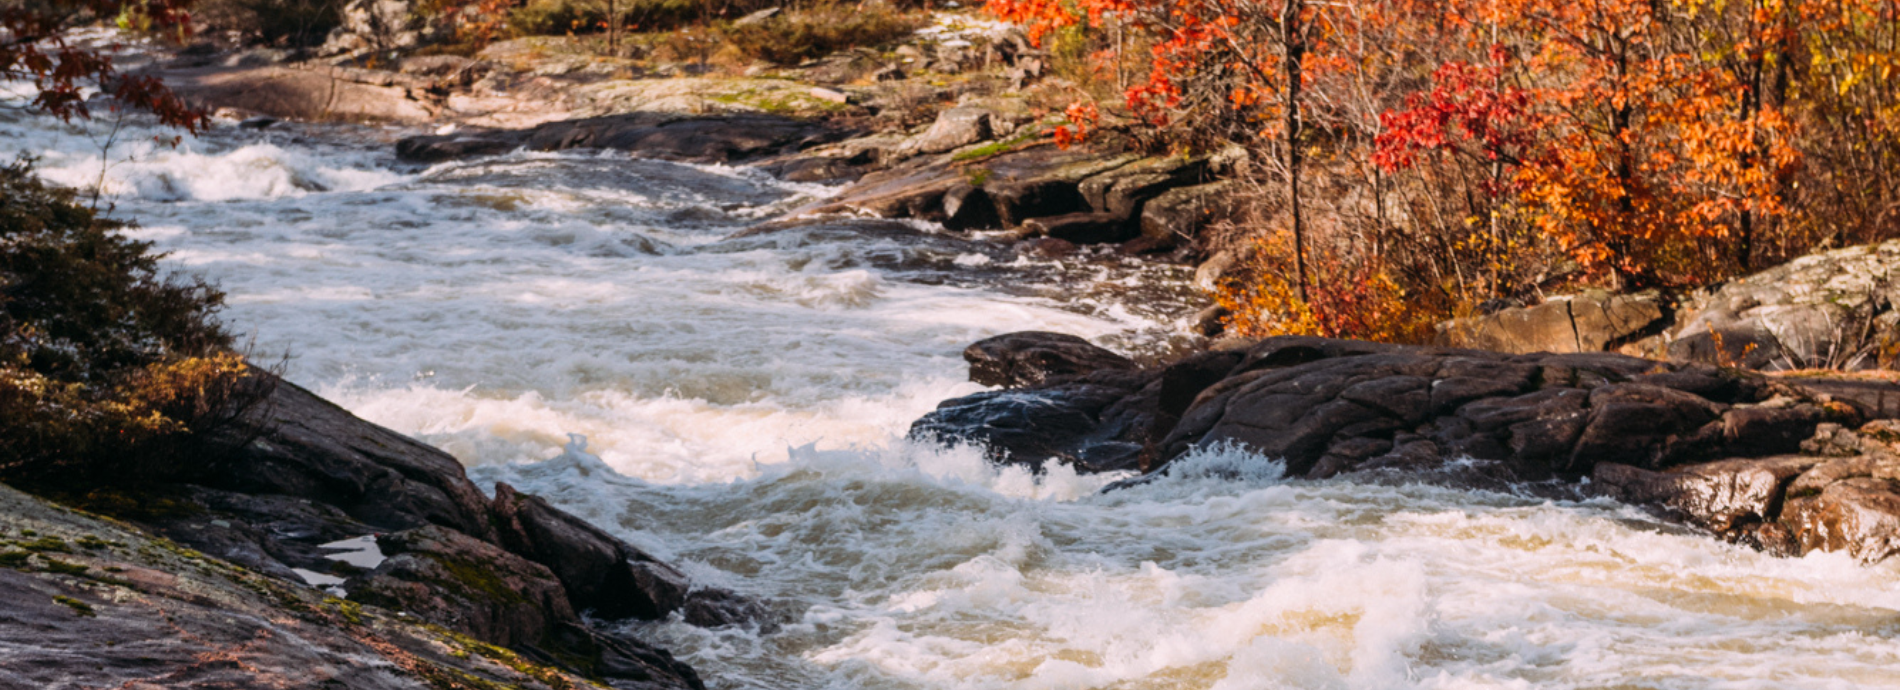 rapids on the Severn River surrounded by trees in fall colours